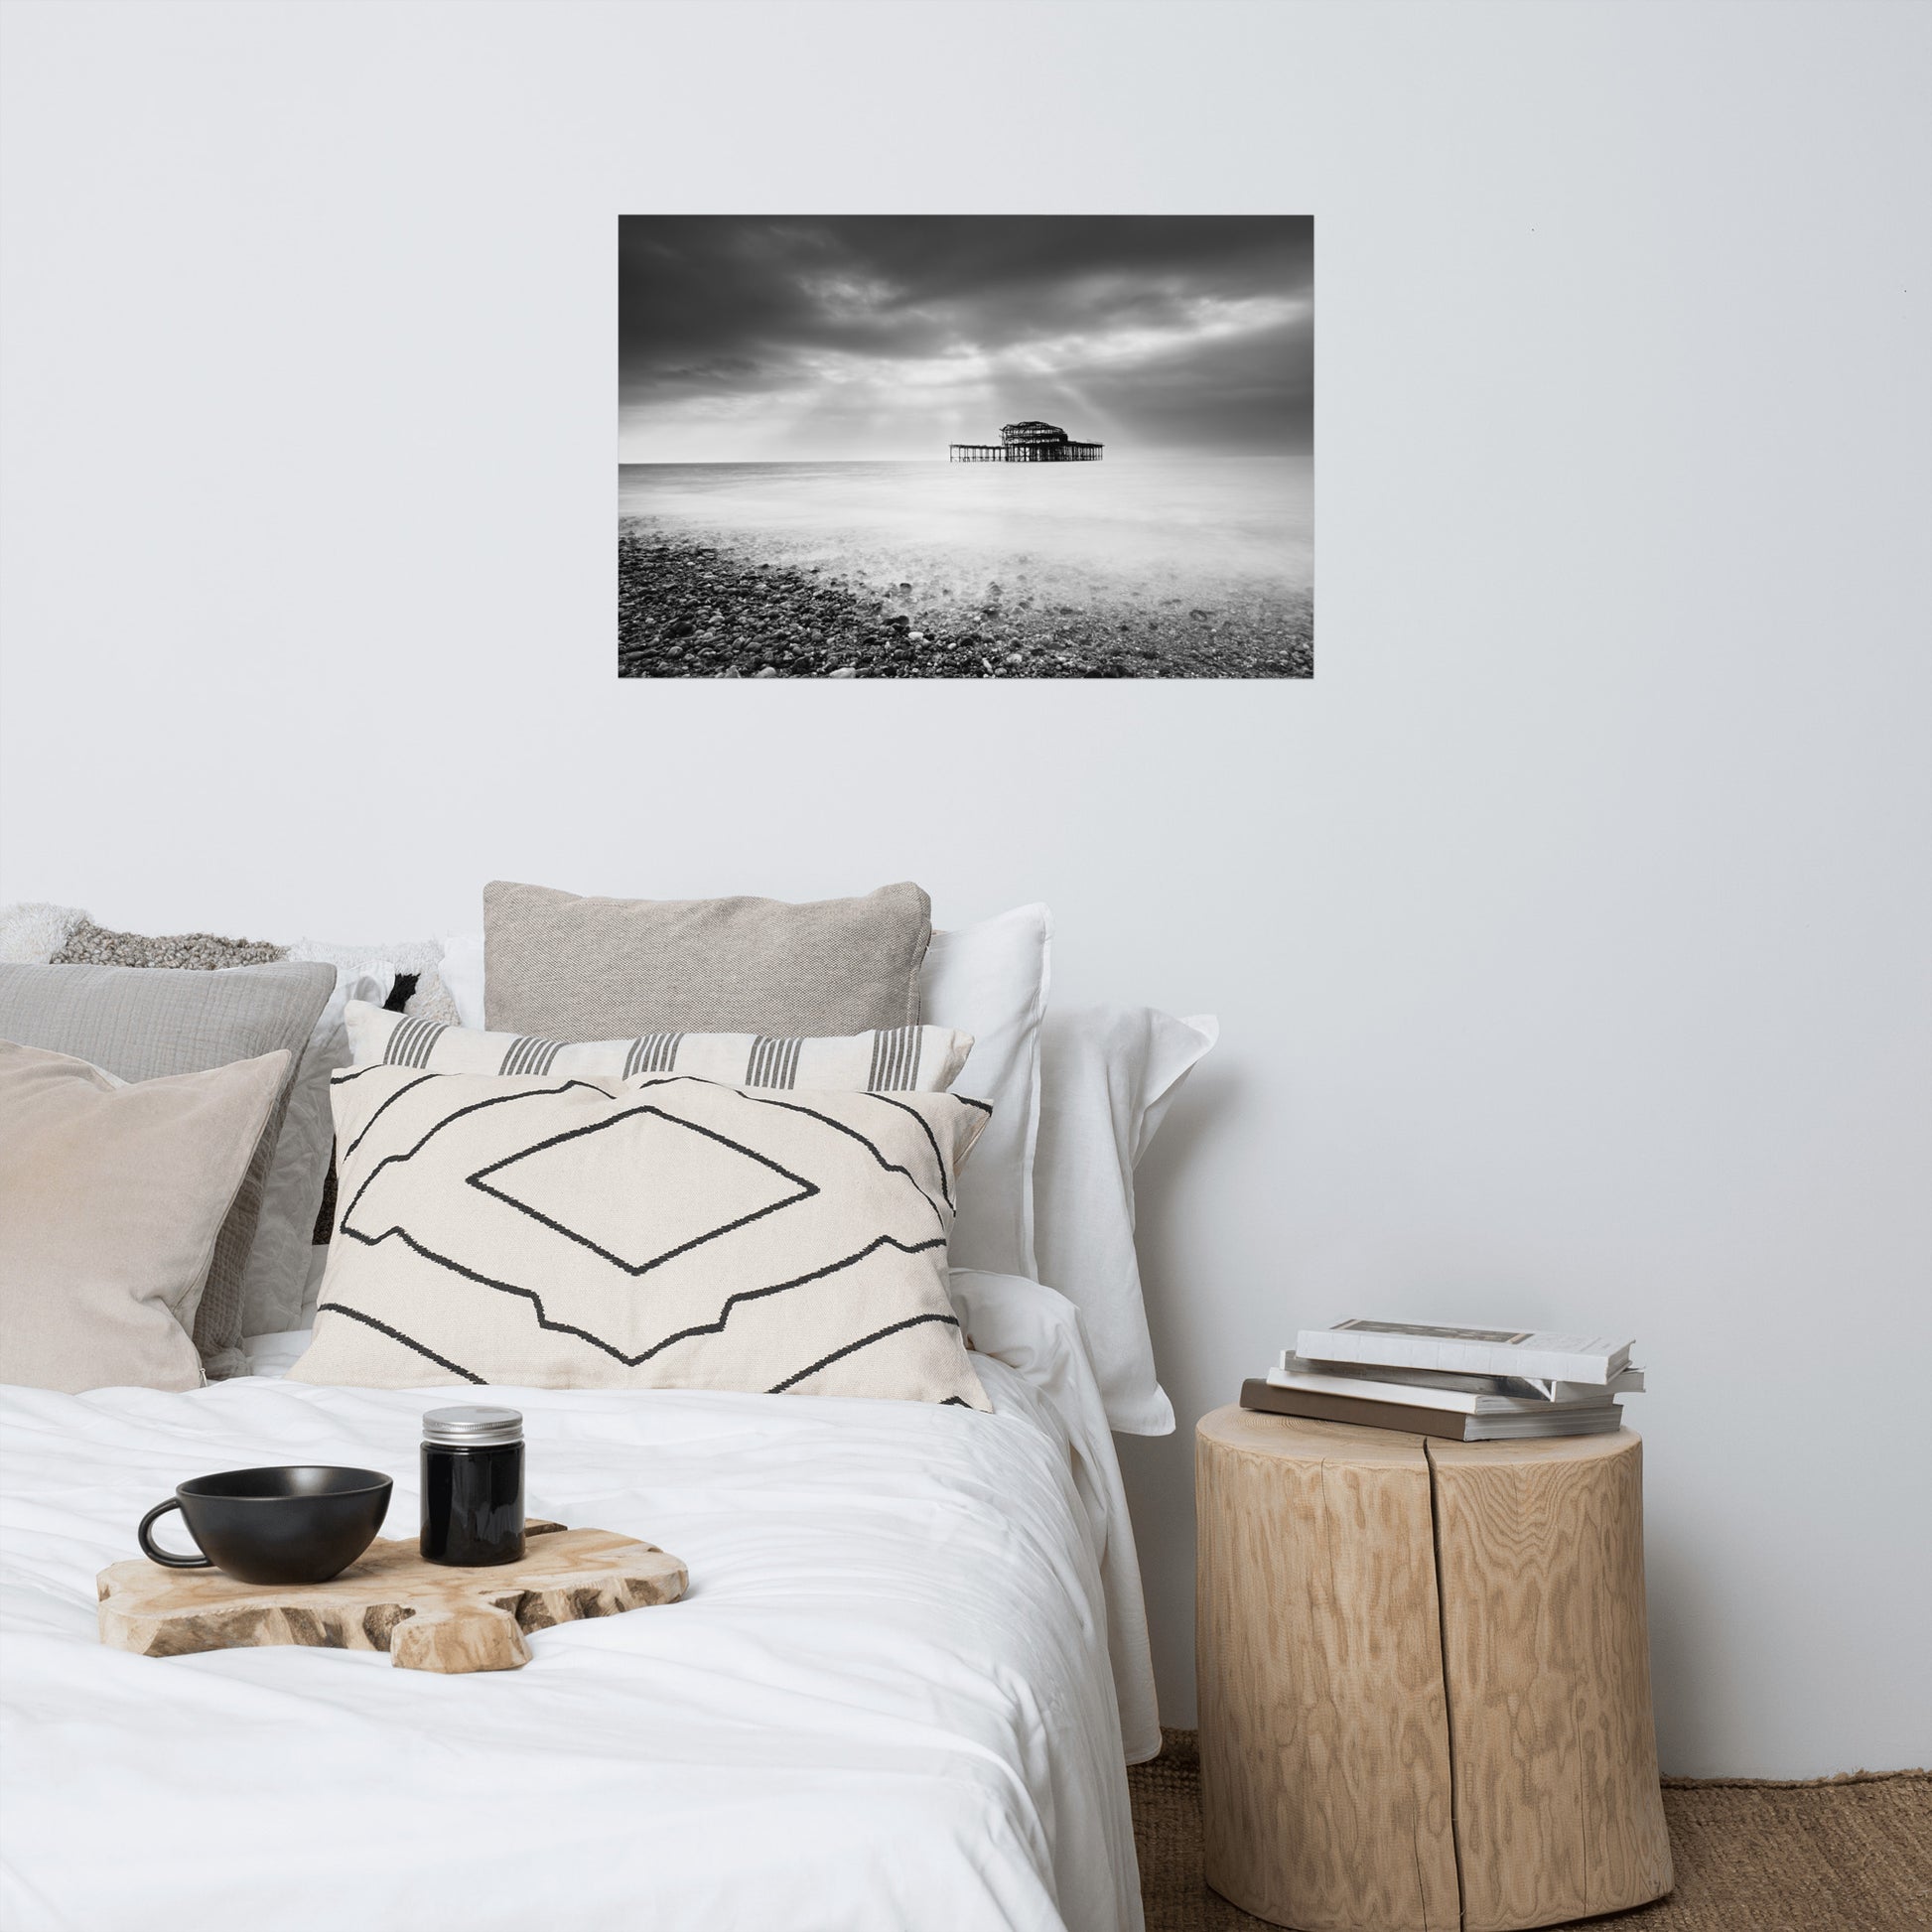 Beach Posters For Wall: Abandoned West Pier Coastal Seascape Black and White Landscape Photo Loose Wall Art Prints